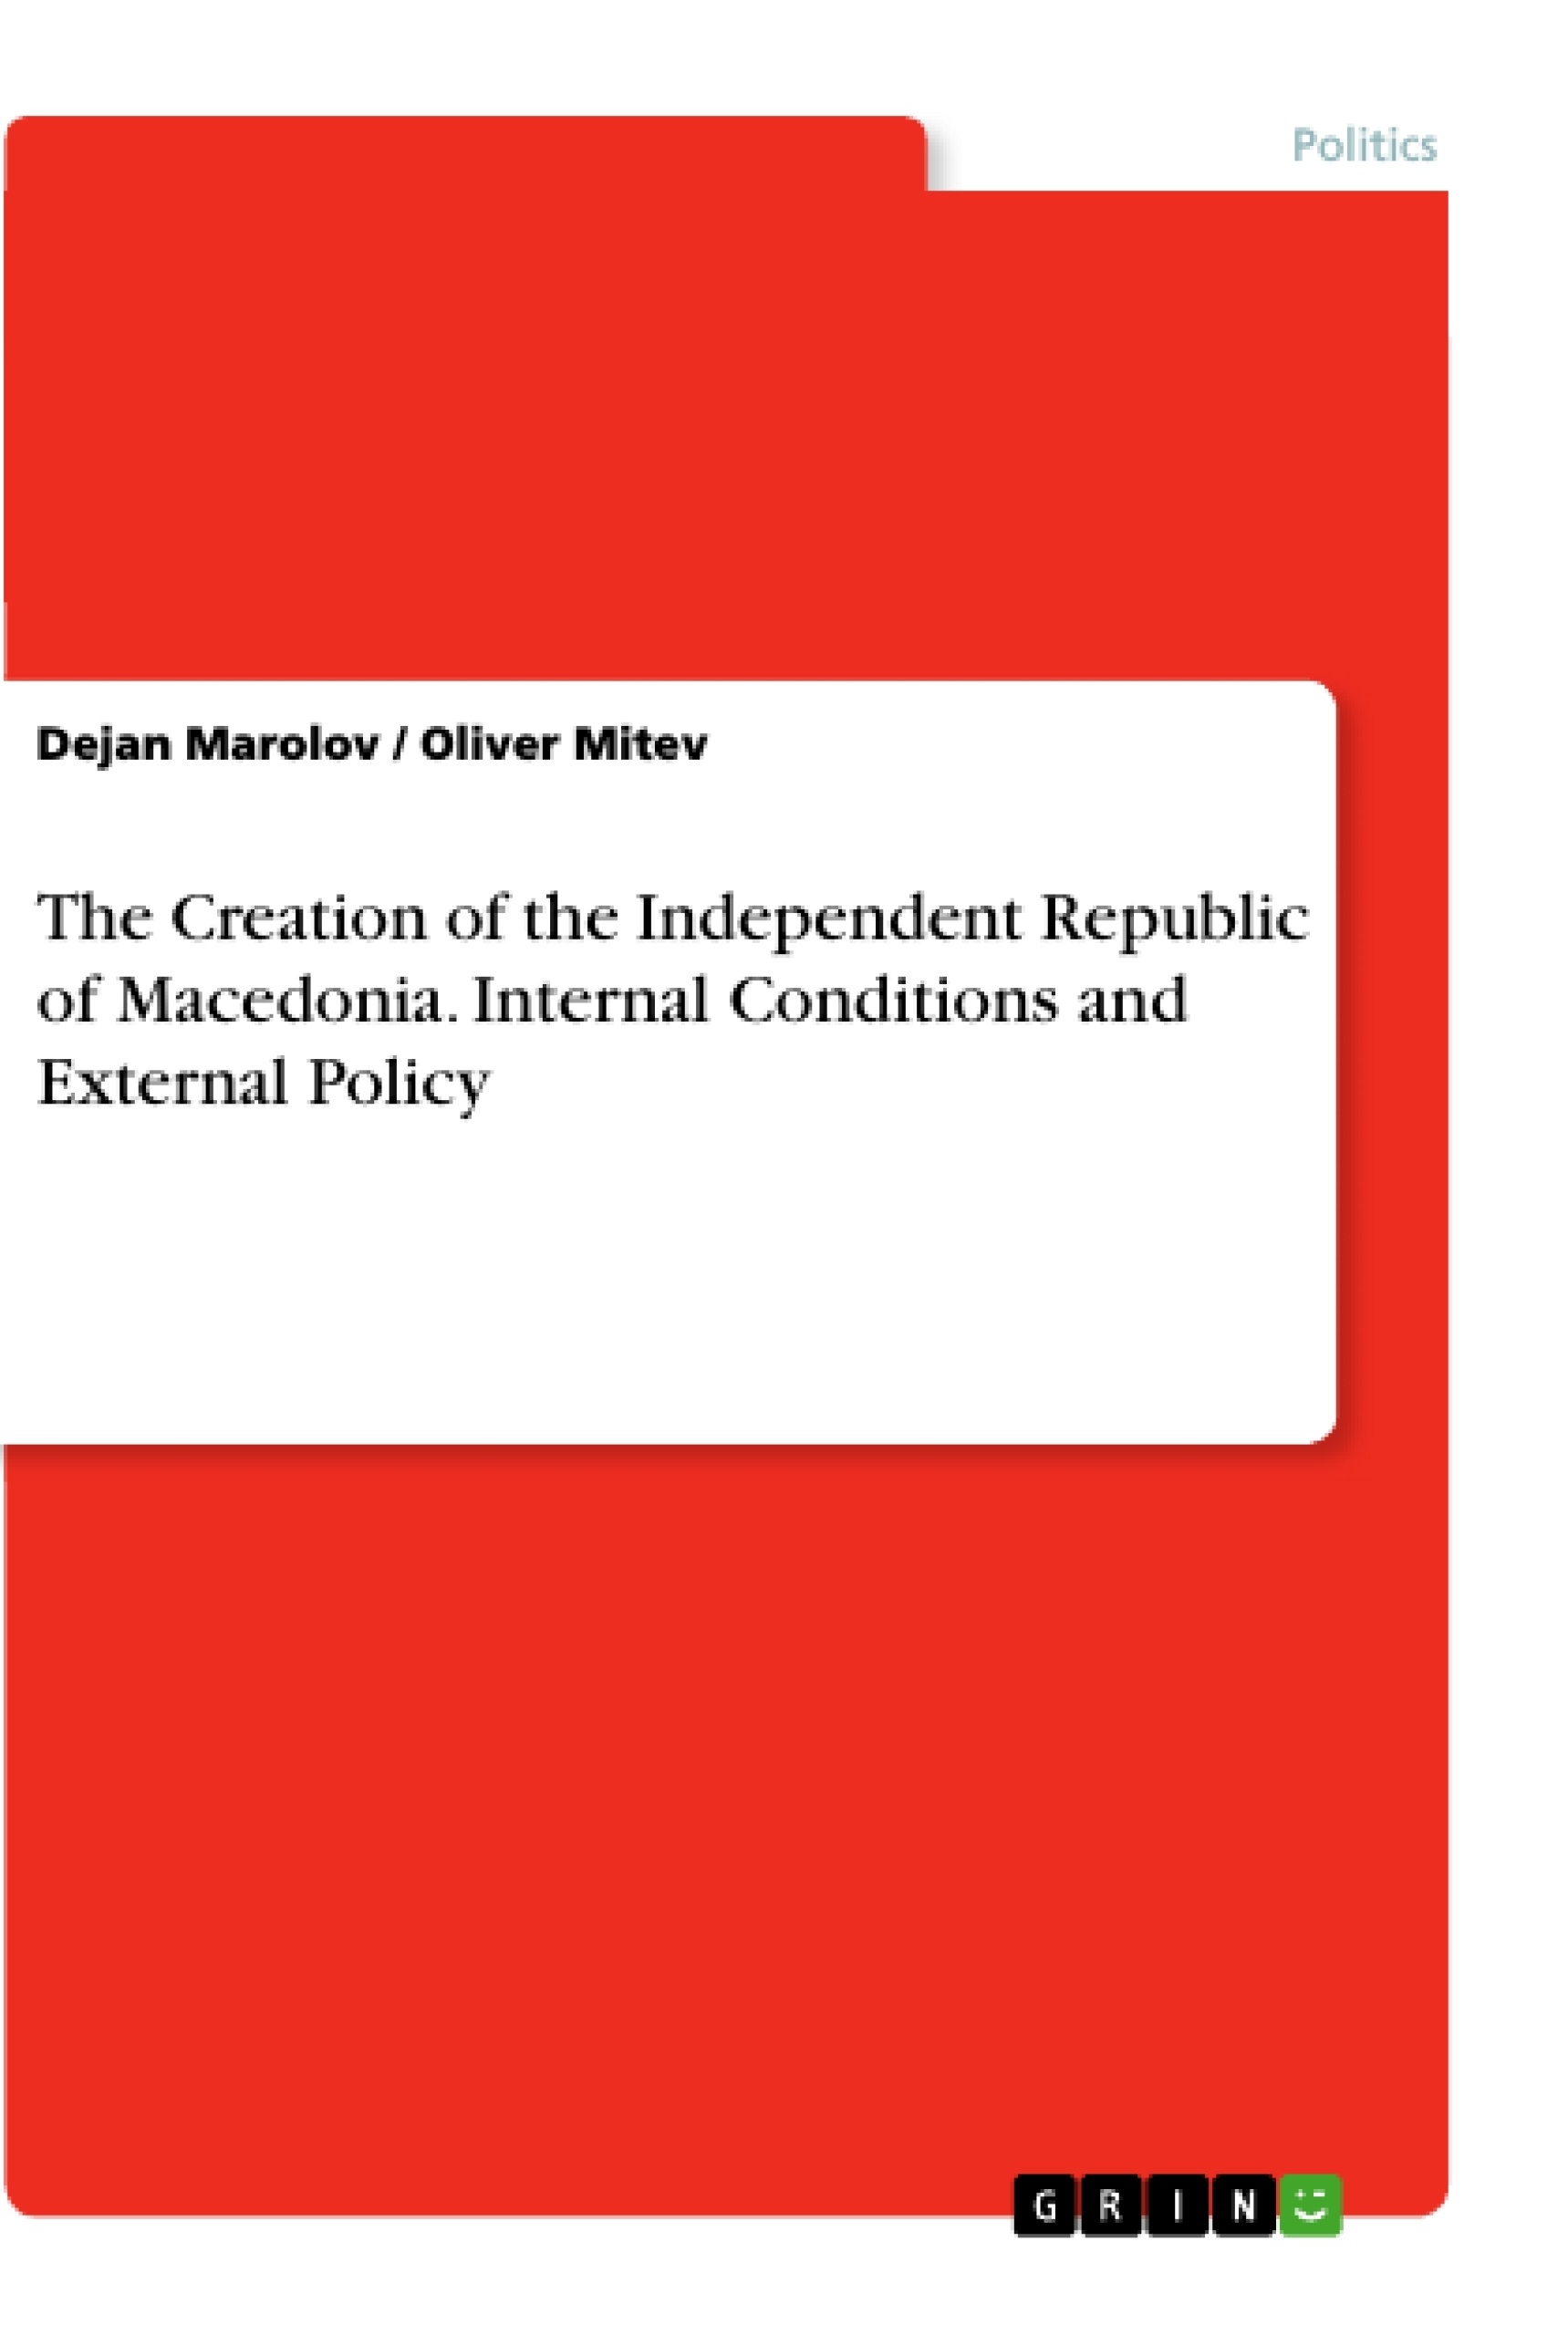 Título: The Creation of the Independent Republic of Macedonia. Internal Conditions and External Policy